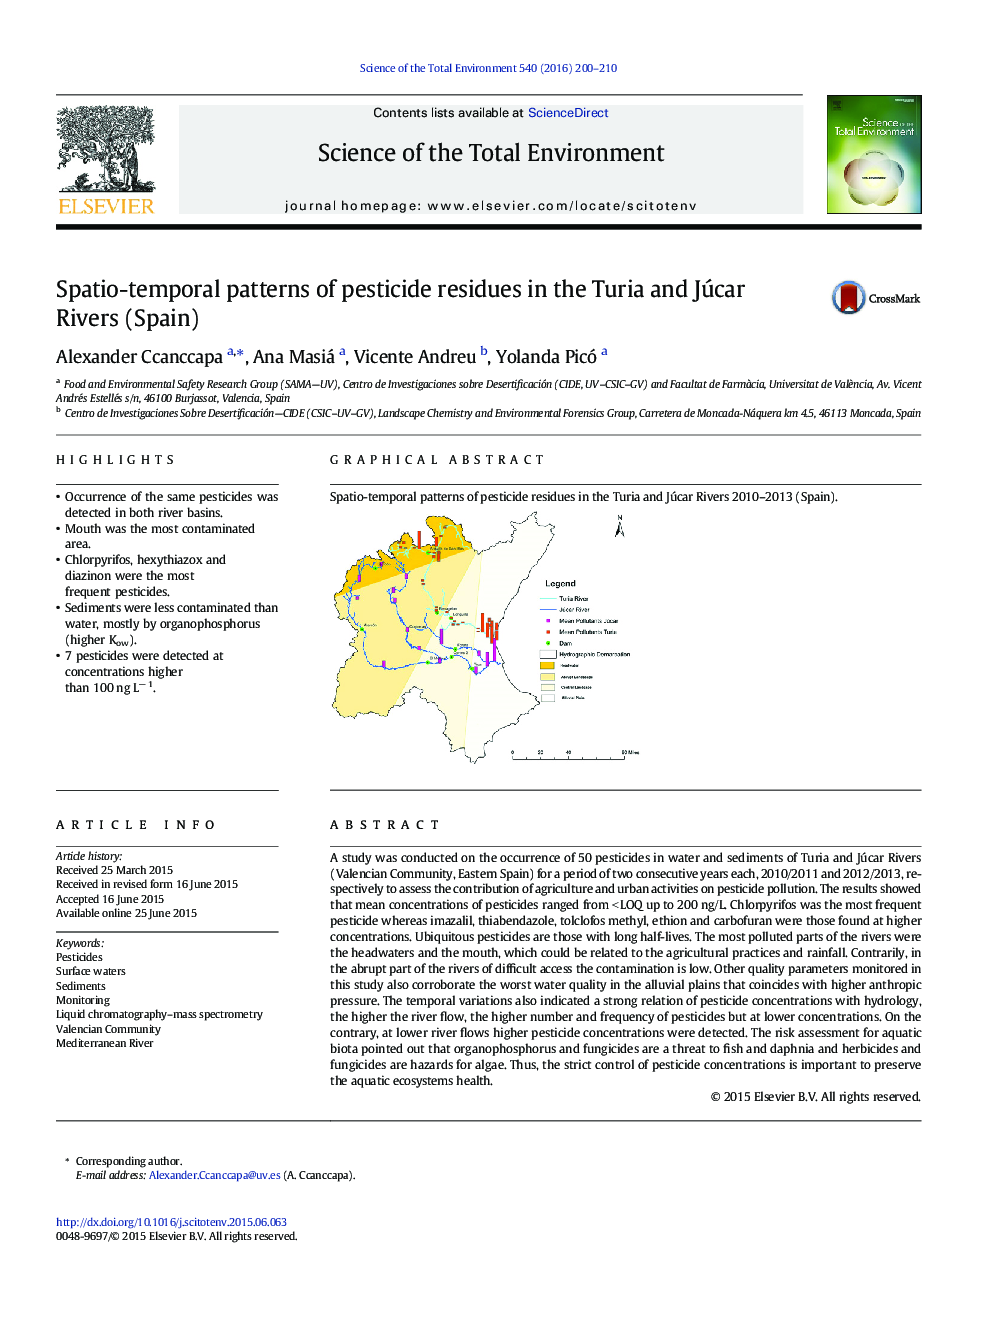 Spatio-temporal patterns of pesticide residues in the Turia and Júcar Rivers (Spain)